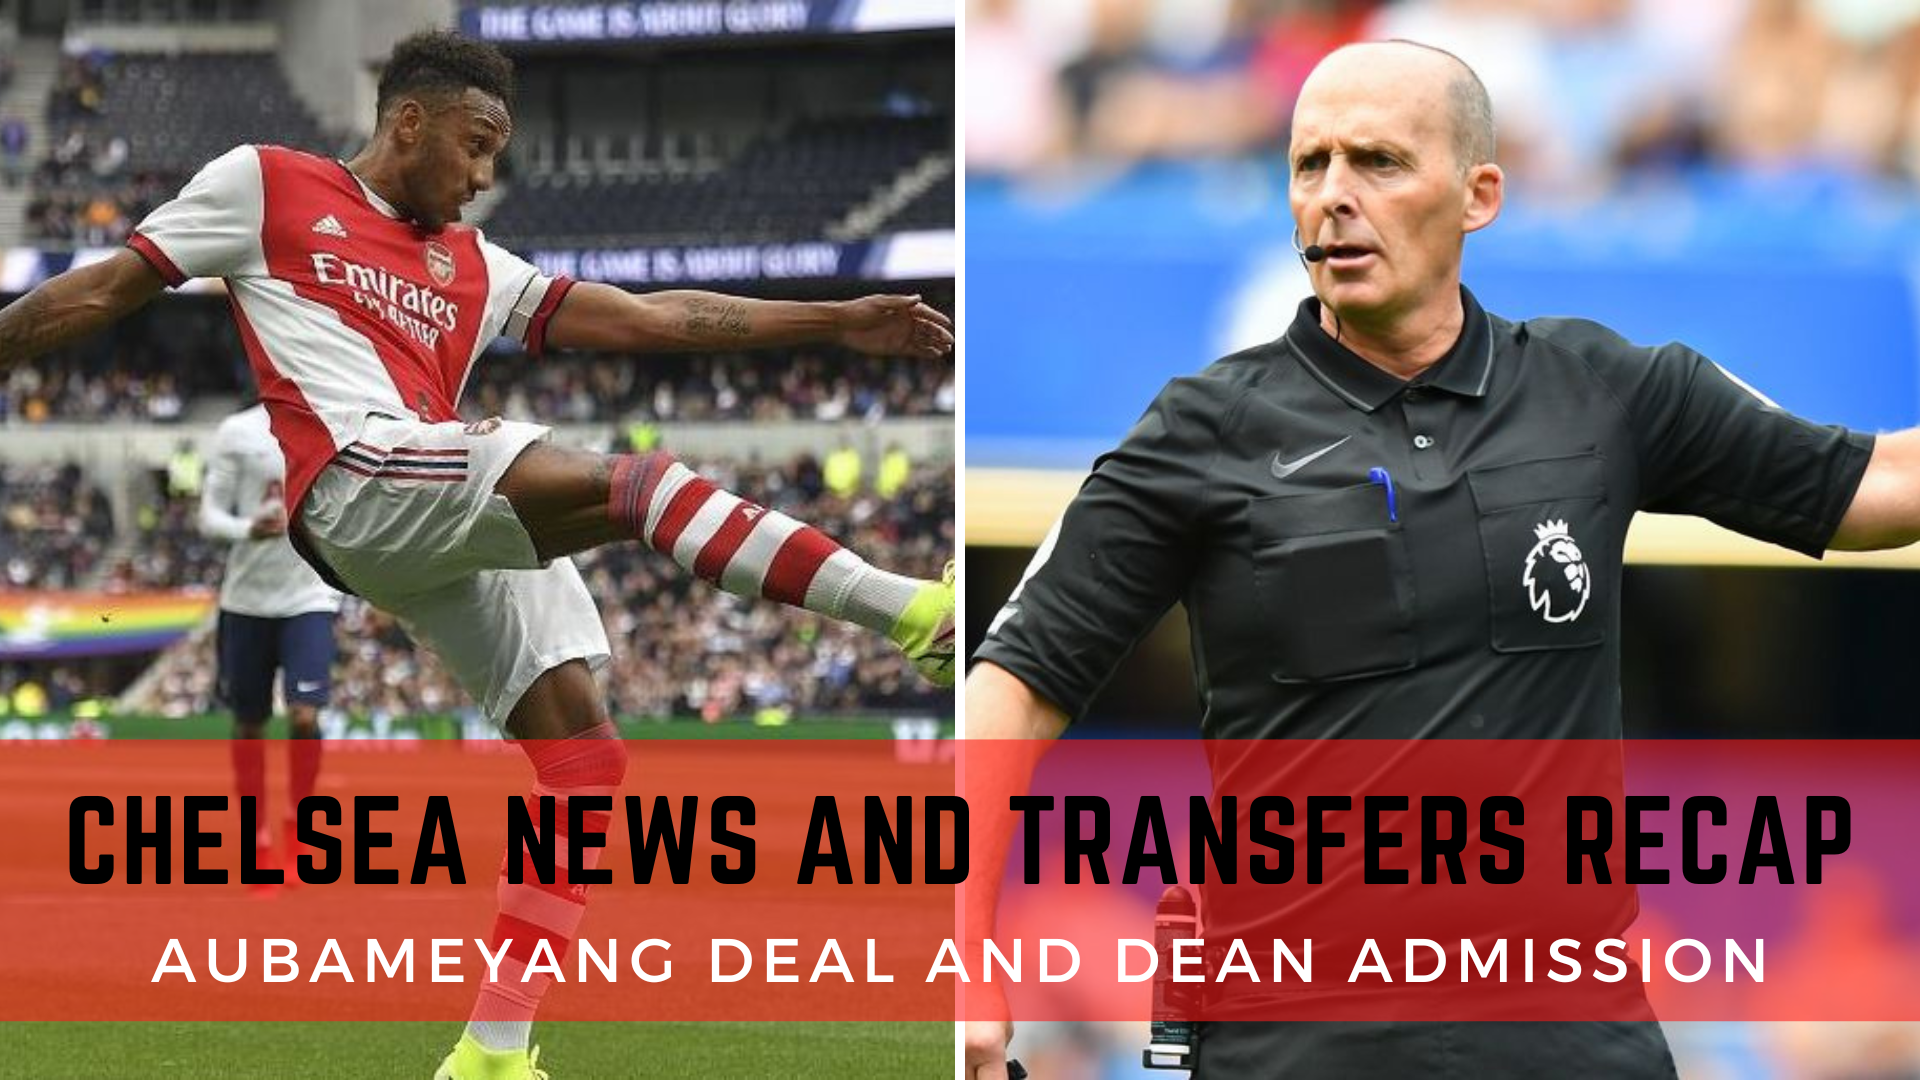 Chelsea News And Transfers Recap - Aubameyang Deal And Dean Admission